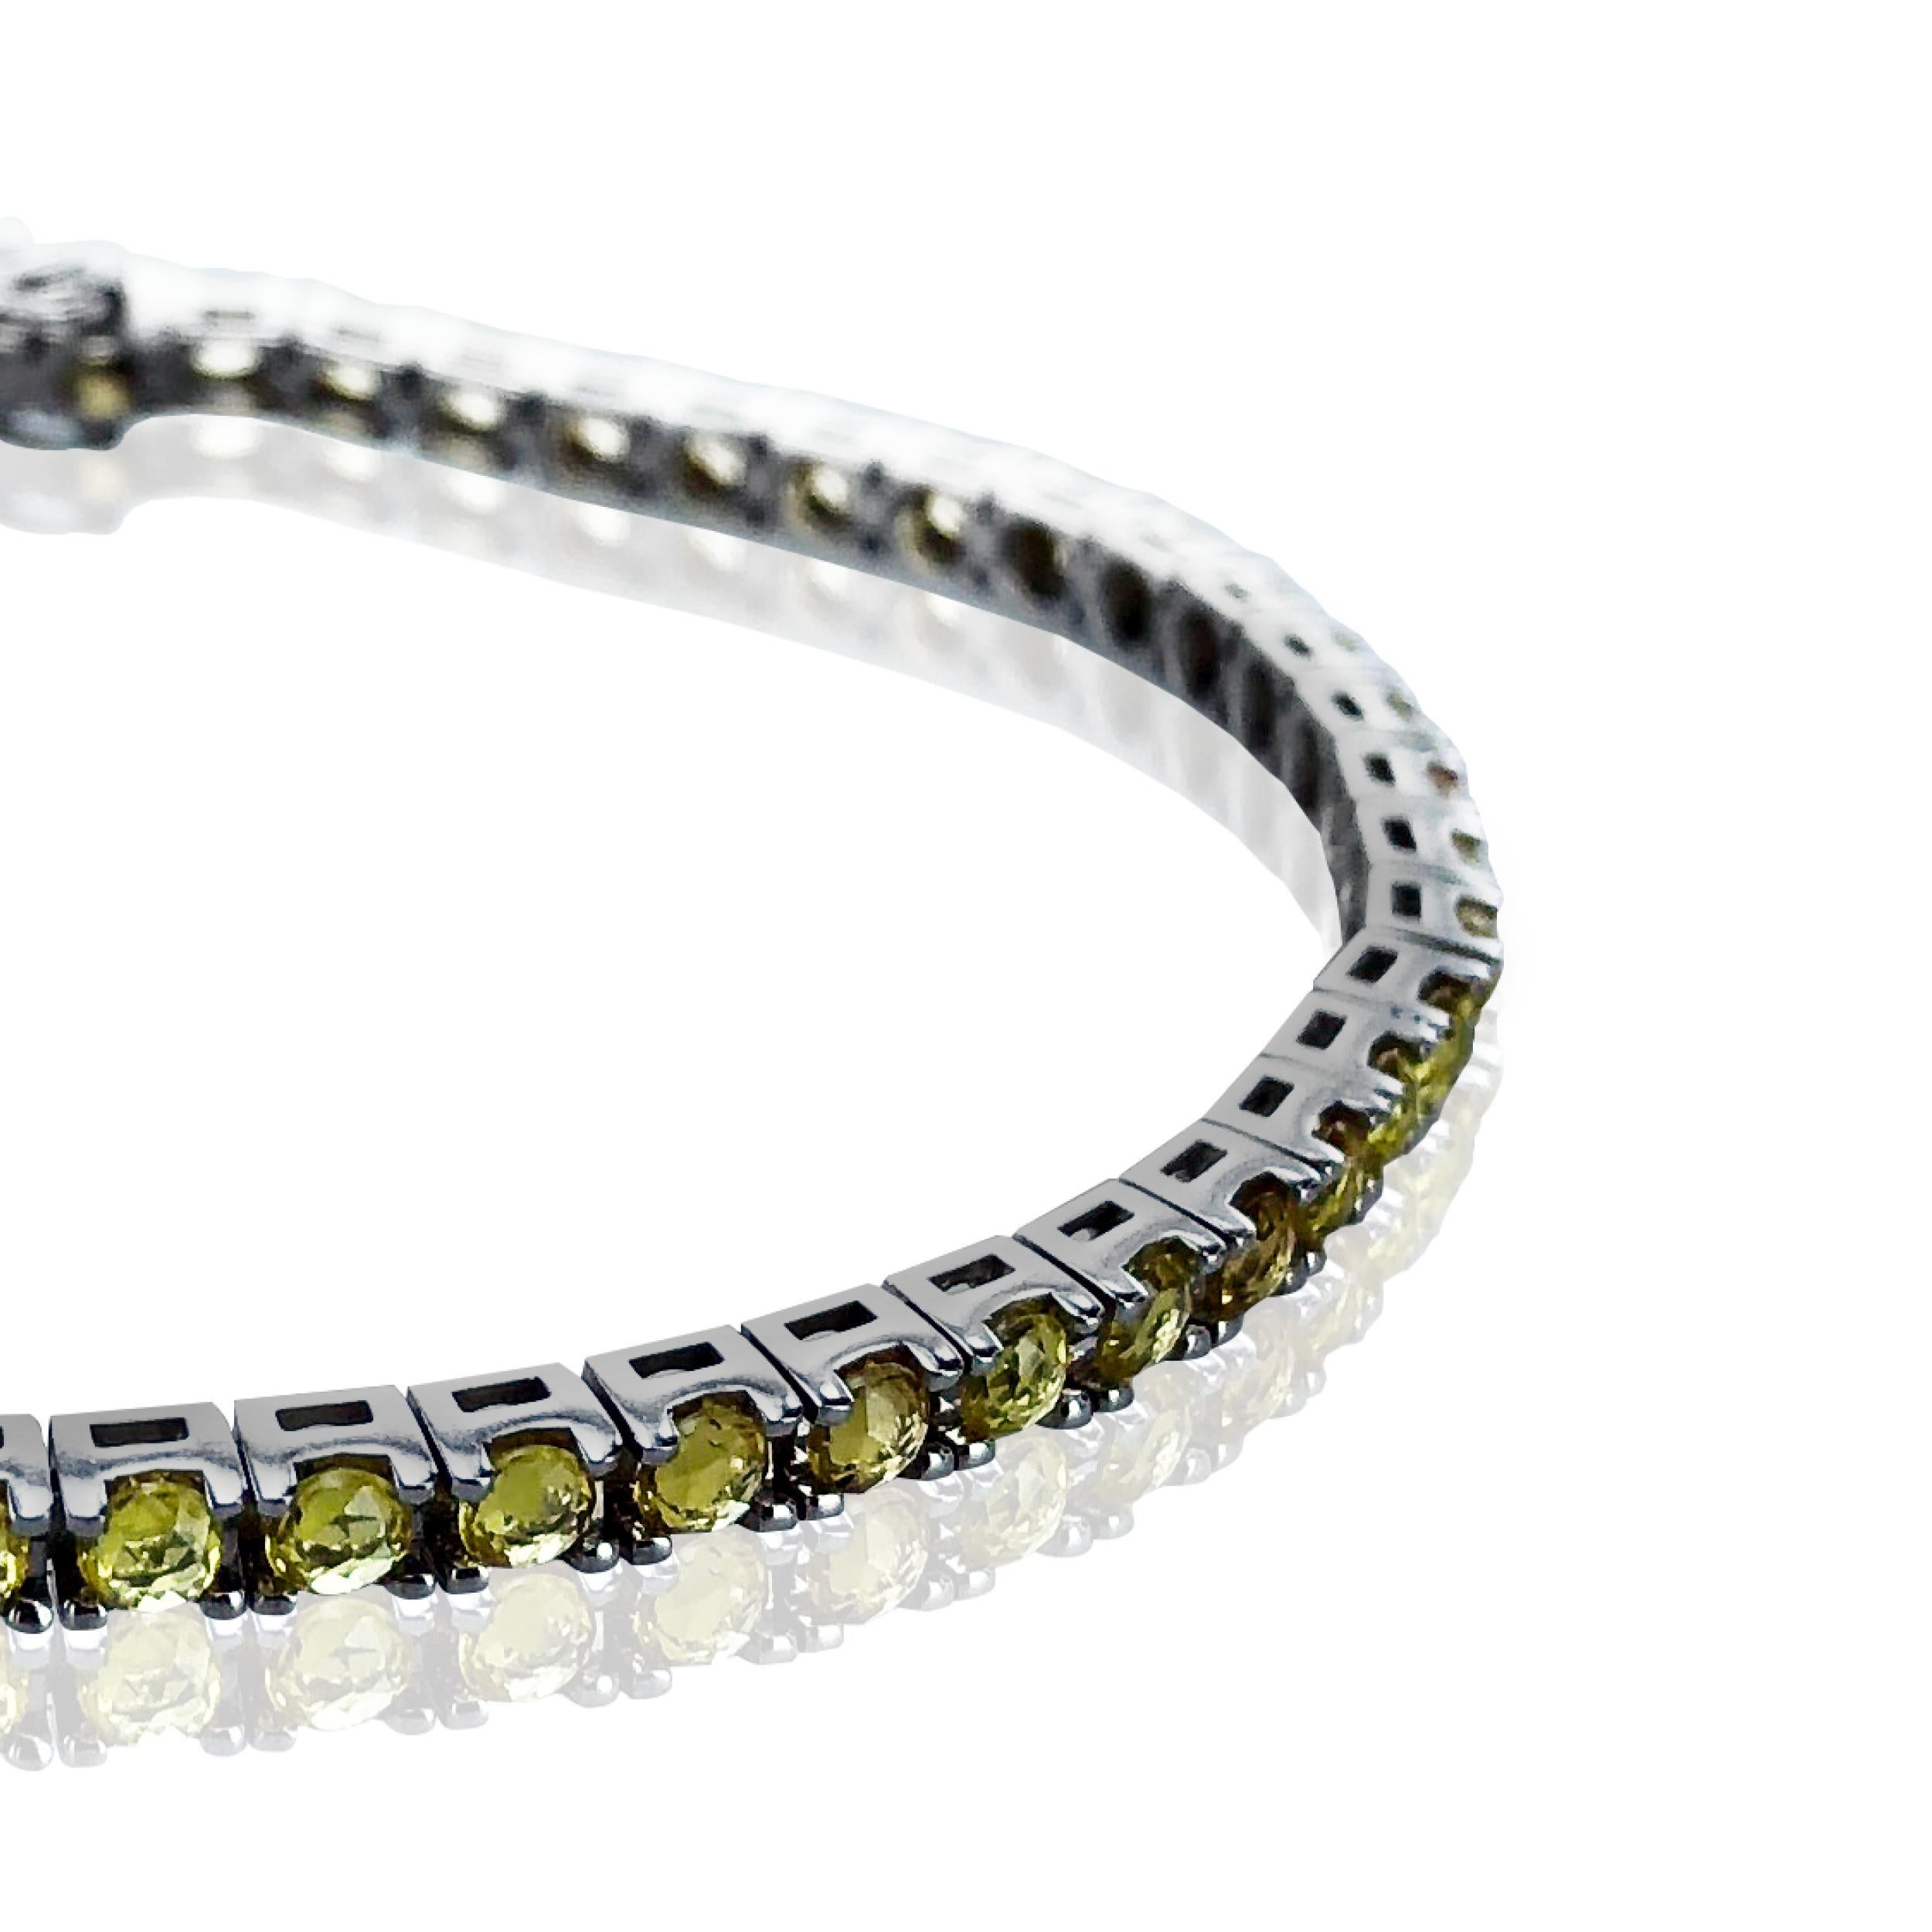 This gorgeous 4.77 Carat Yellow Sapphire tennis bracelet, set in a TET 18kt Black Gold bracelet makes a striking statement on any wrist.  

Unisex it looks fabulous on anyone, worn alone or stacked with other bracelets. 

Water proof it retains its